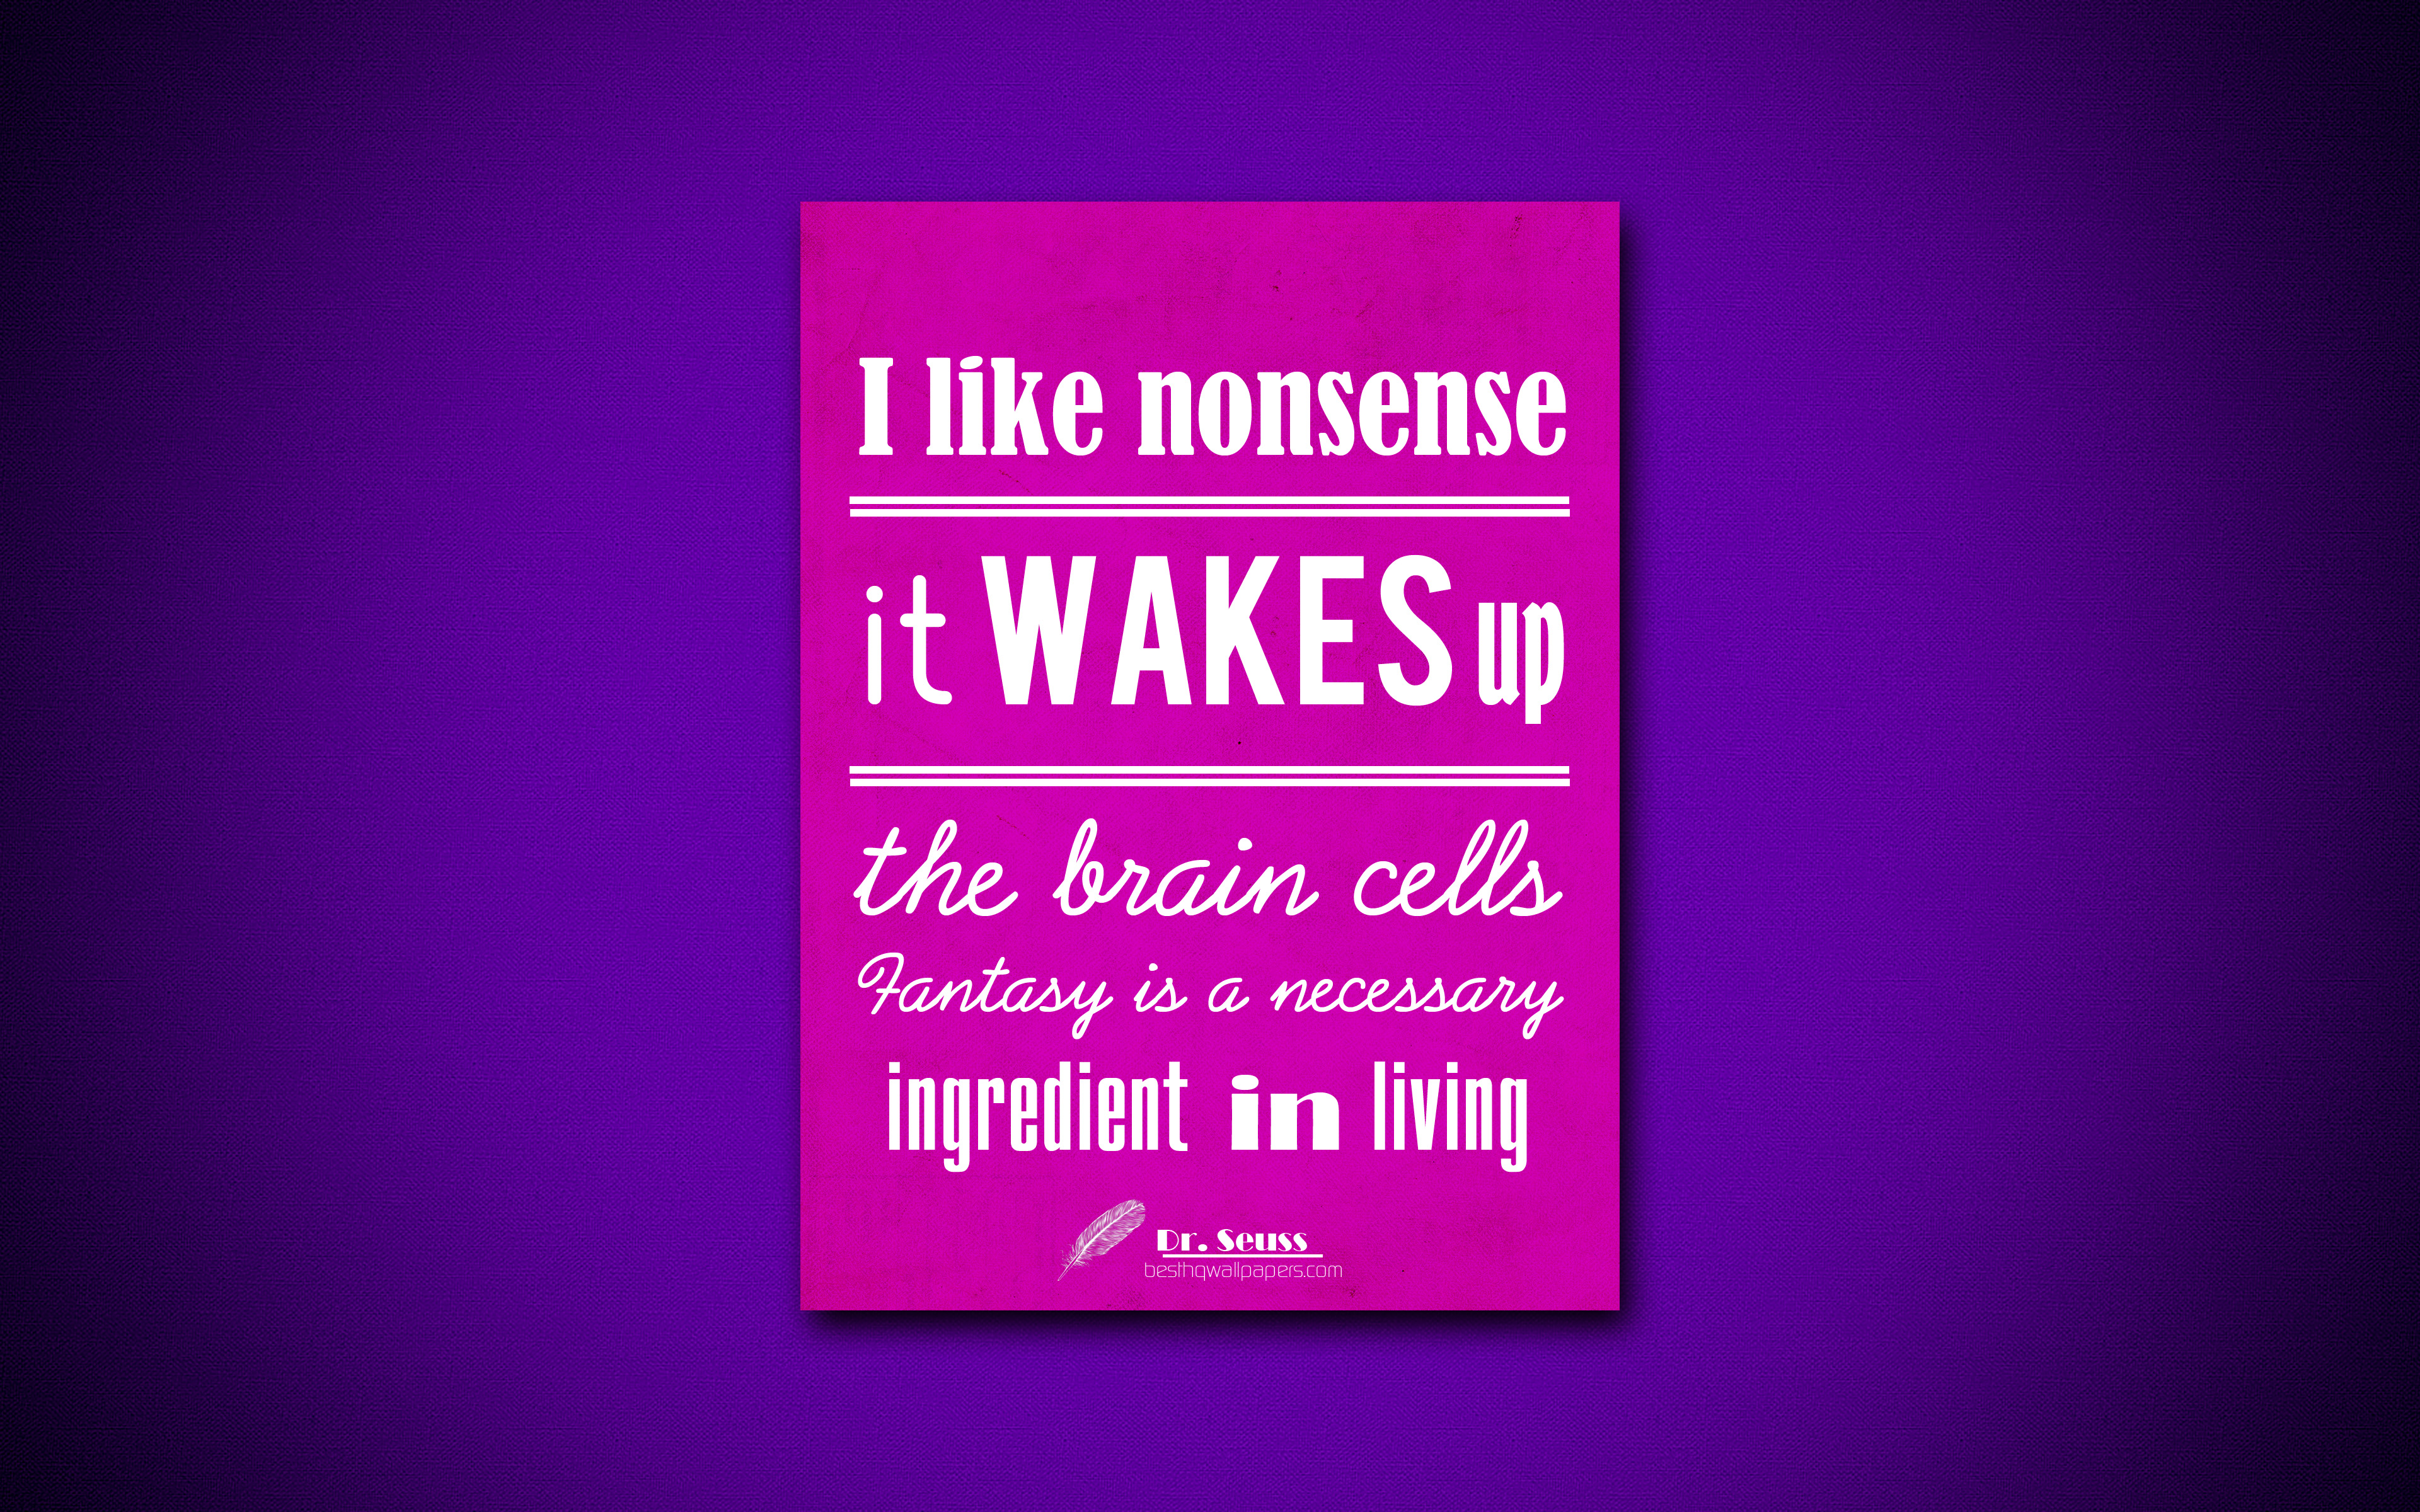 Download wallpaper 4k, I like nonsense It wakes up the brain cells Fantasy is a necessary ingredient in living, quotes about fantasy, Dr Seuss, purple paper, inspiration, Dr Seuss quotes for desktop